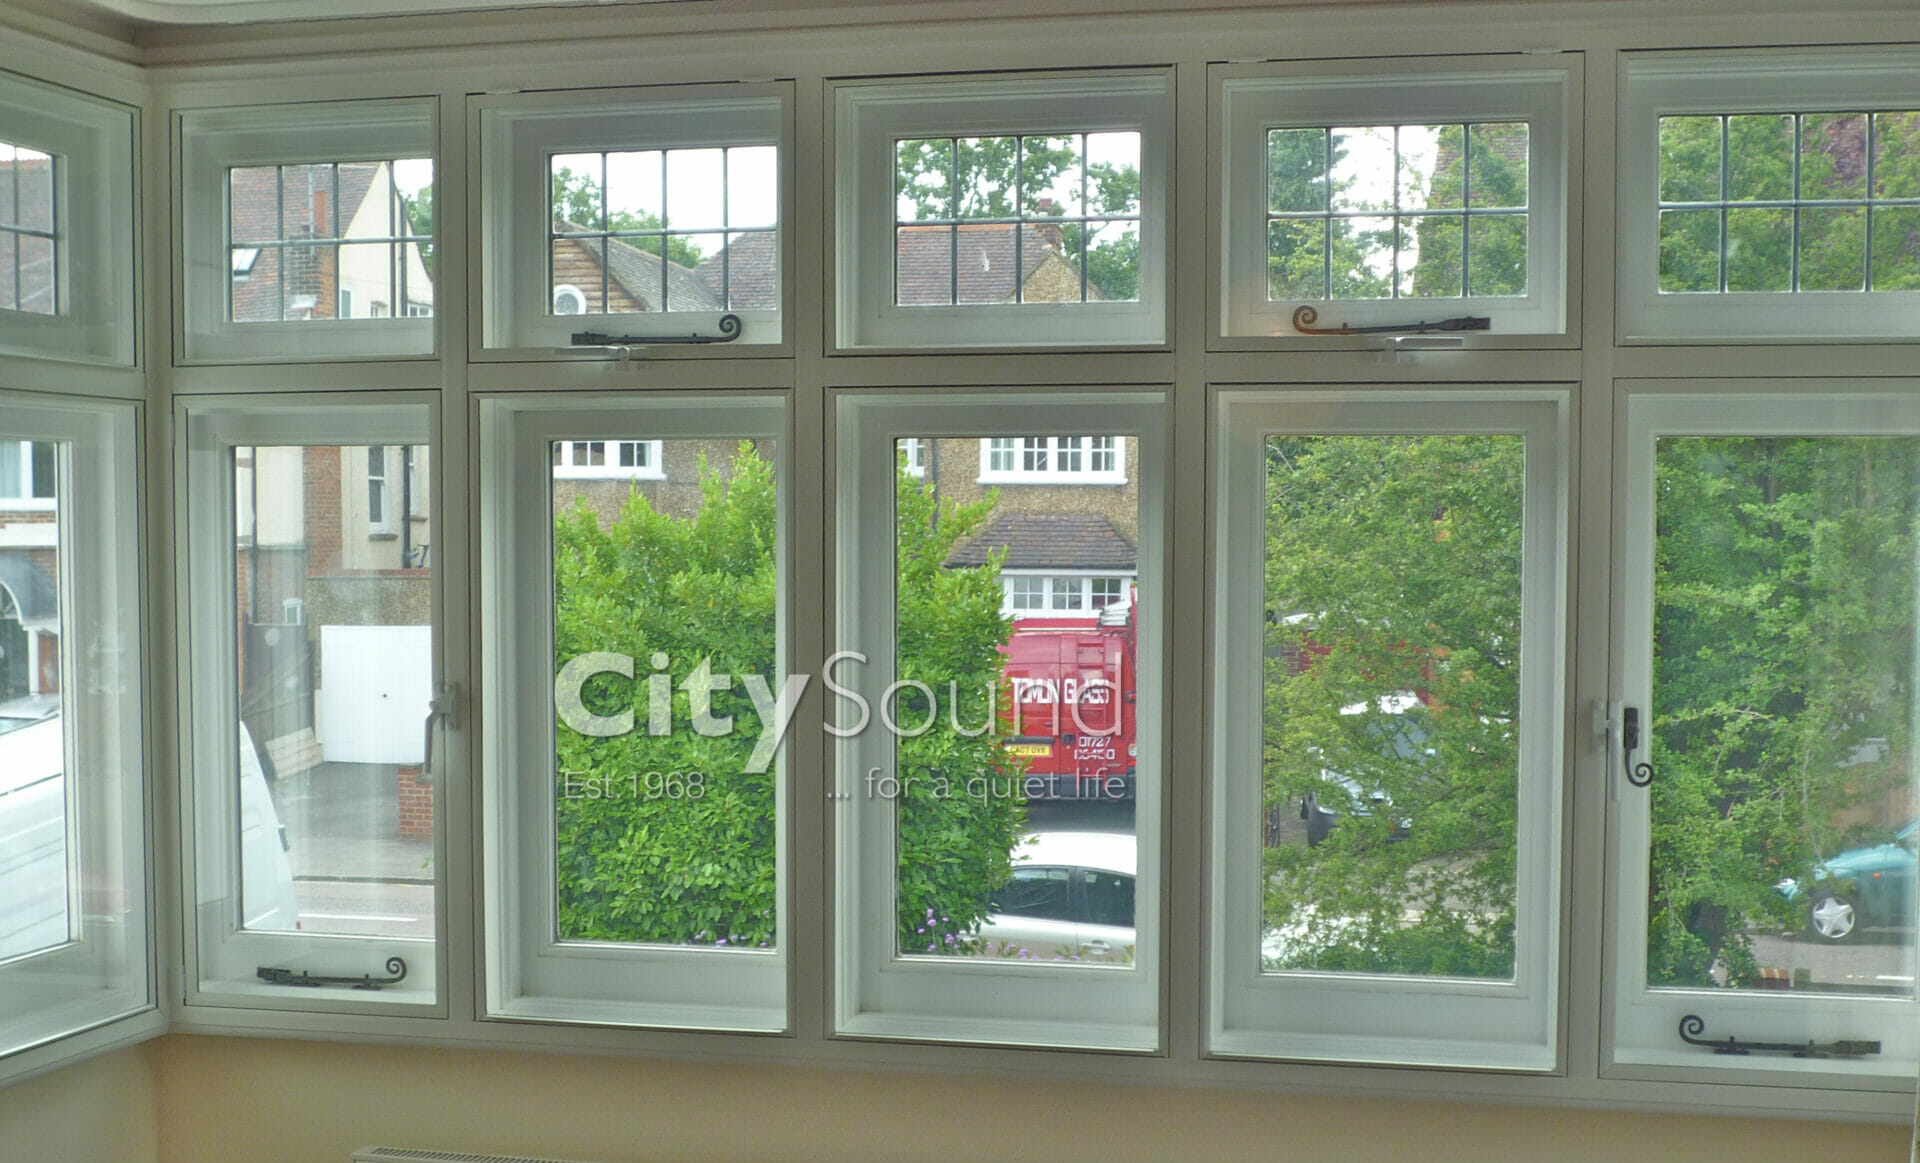 09. Casment (hinge) windows fitted to cover this box bay (London)